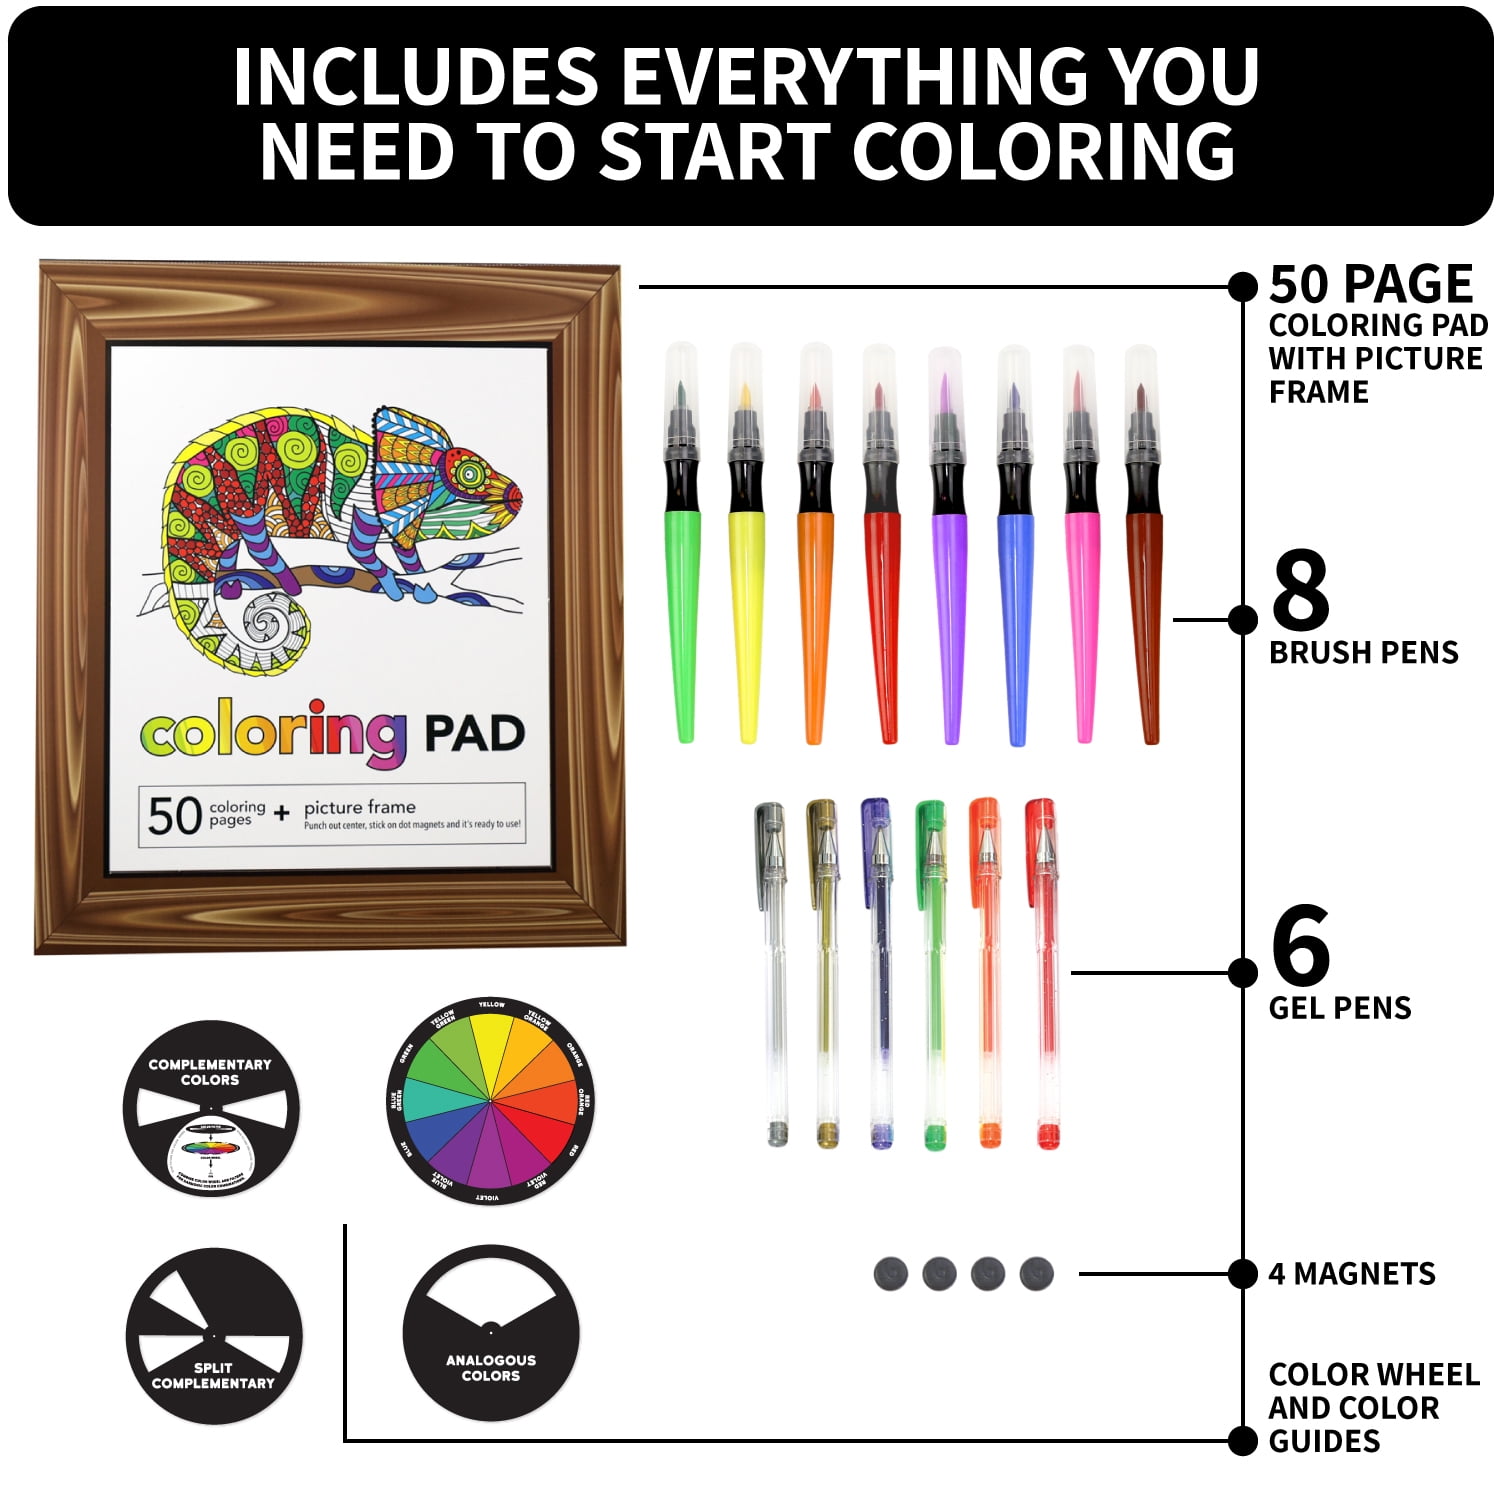 Buy SpiceBox Children's Activity Kits Fun With Drawing, 22 Cartoon Drawing  Kit For Kids Projects, Step By Step Instruction Art Kit For Kids, 6-14 Boys  and Girls Online at Lowest Price Ever